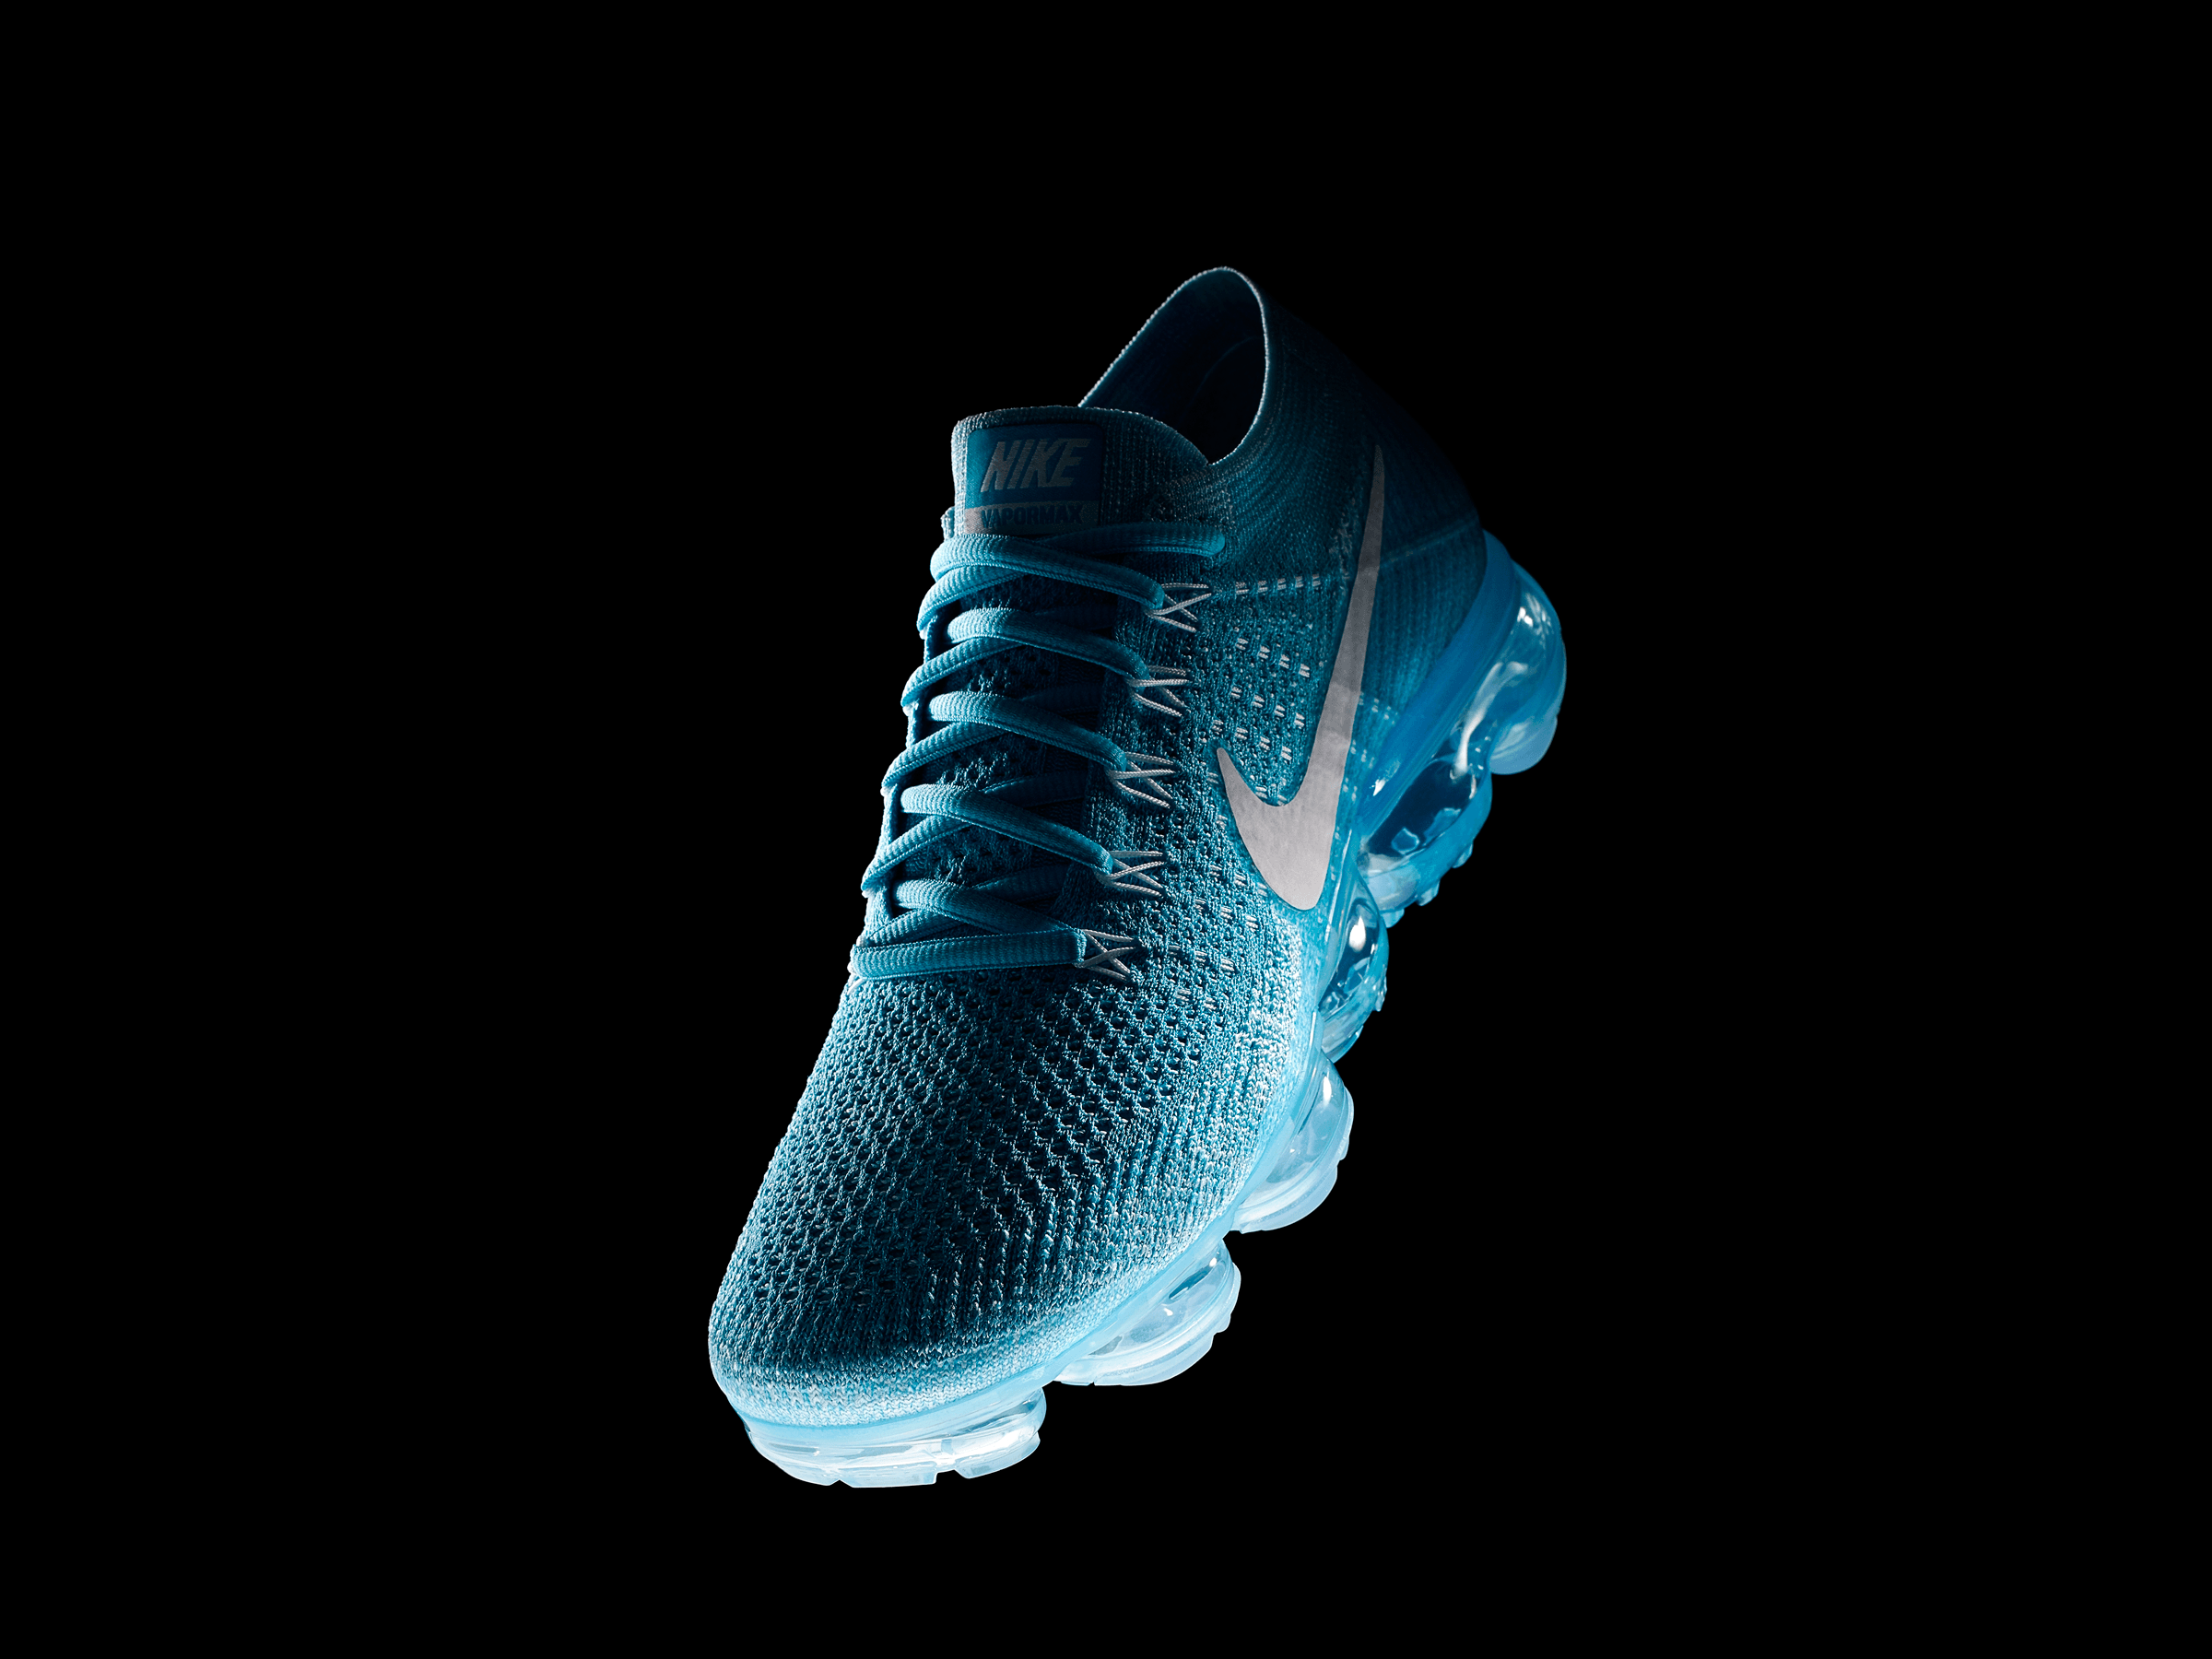 Niike Vapor Max Logo - From Tailwind to VaporMax, the Evolution of Nike's AIR Line | WIRED